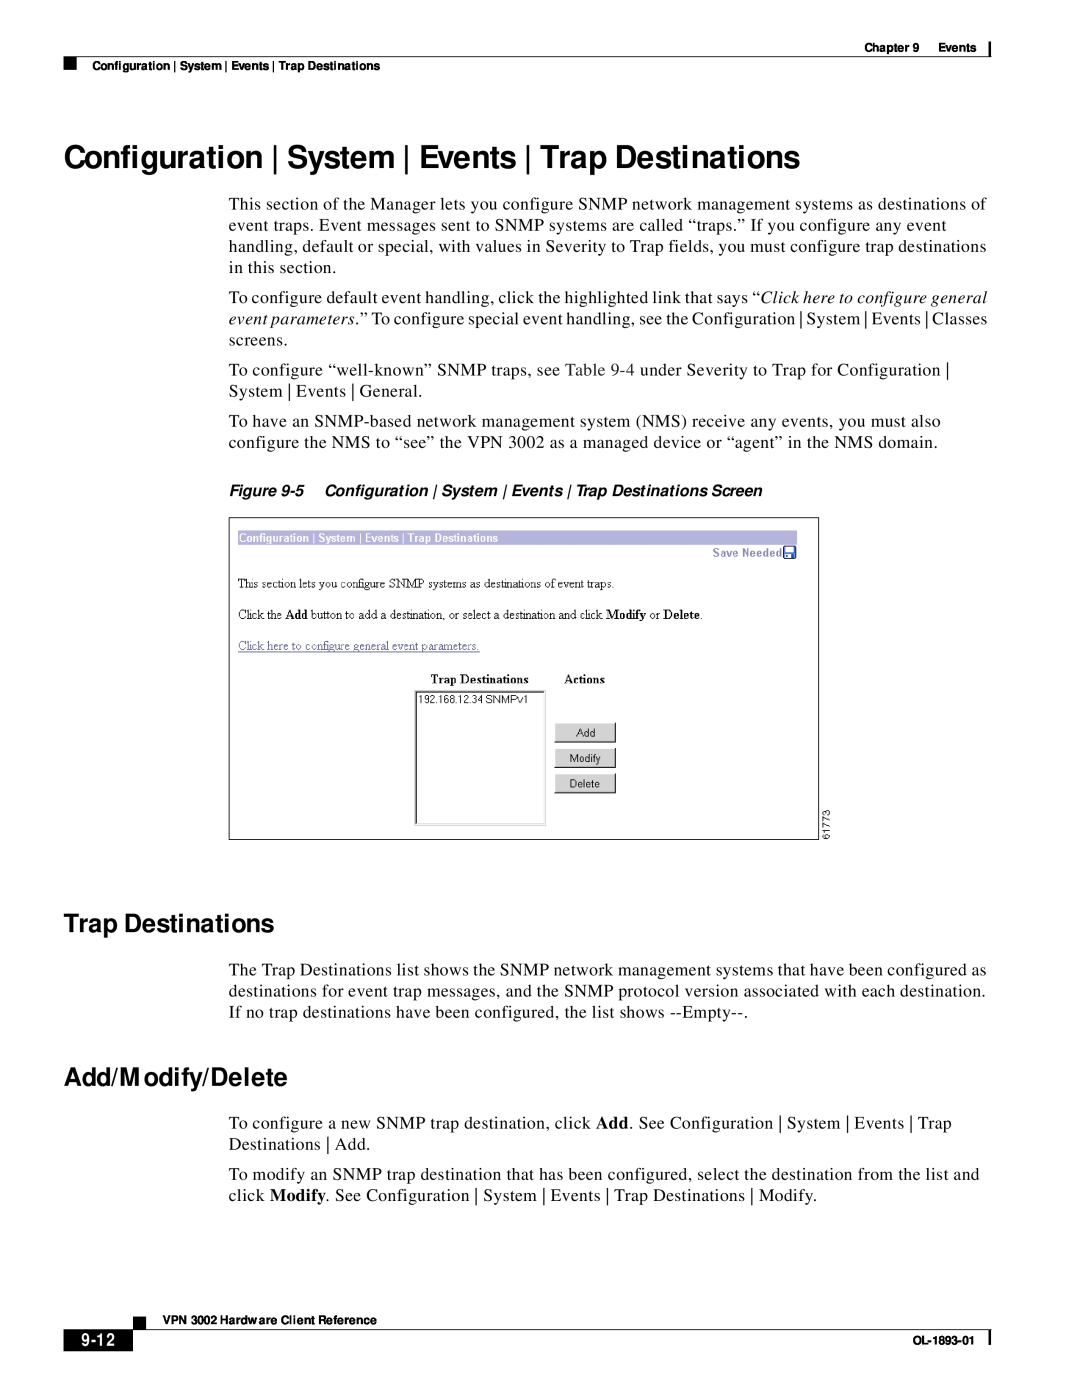 Cisco Systems manual Trap Destinations, 9-12, Add/Modify/Delete, Chapter, VPN 3002 Hardware Client Reference 